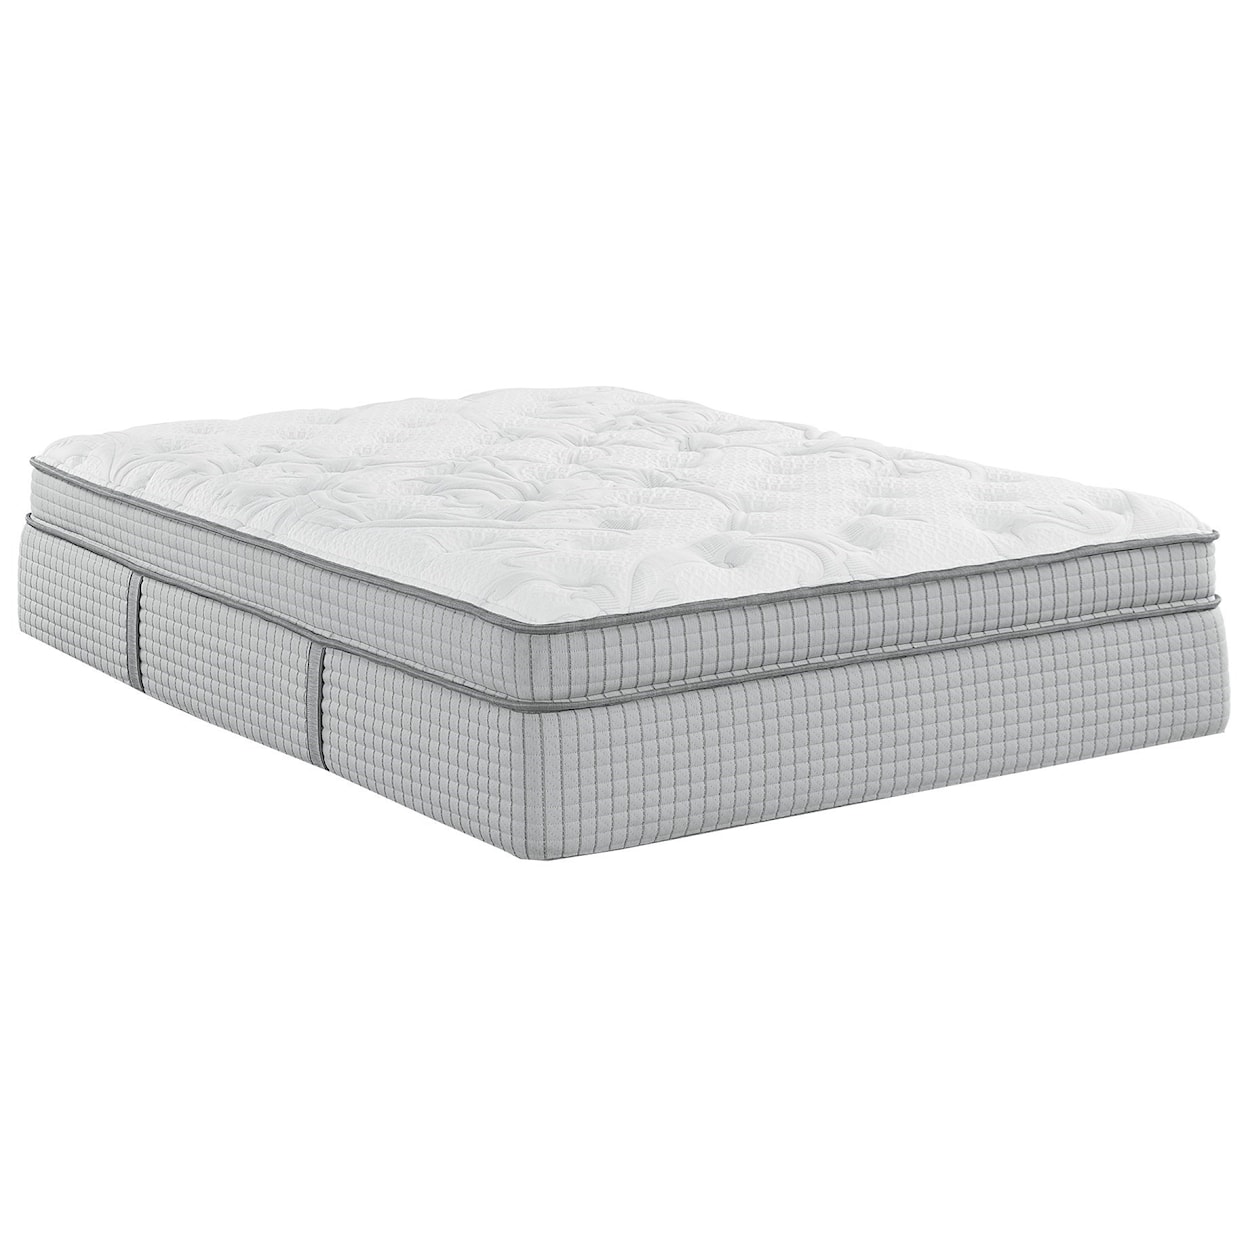 Restonic Biltmore House Euro Top Full Euro Top Coil on Coil Mattress